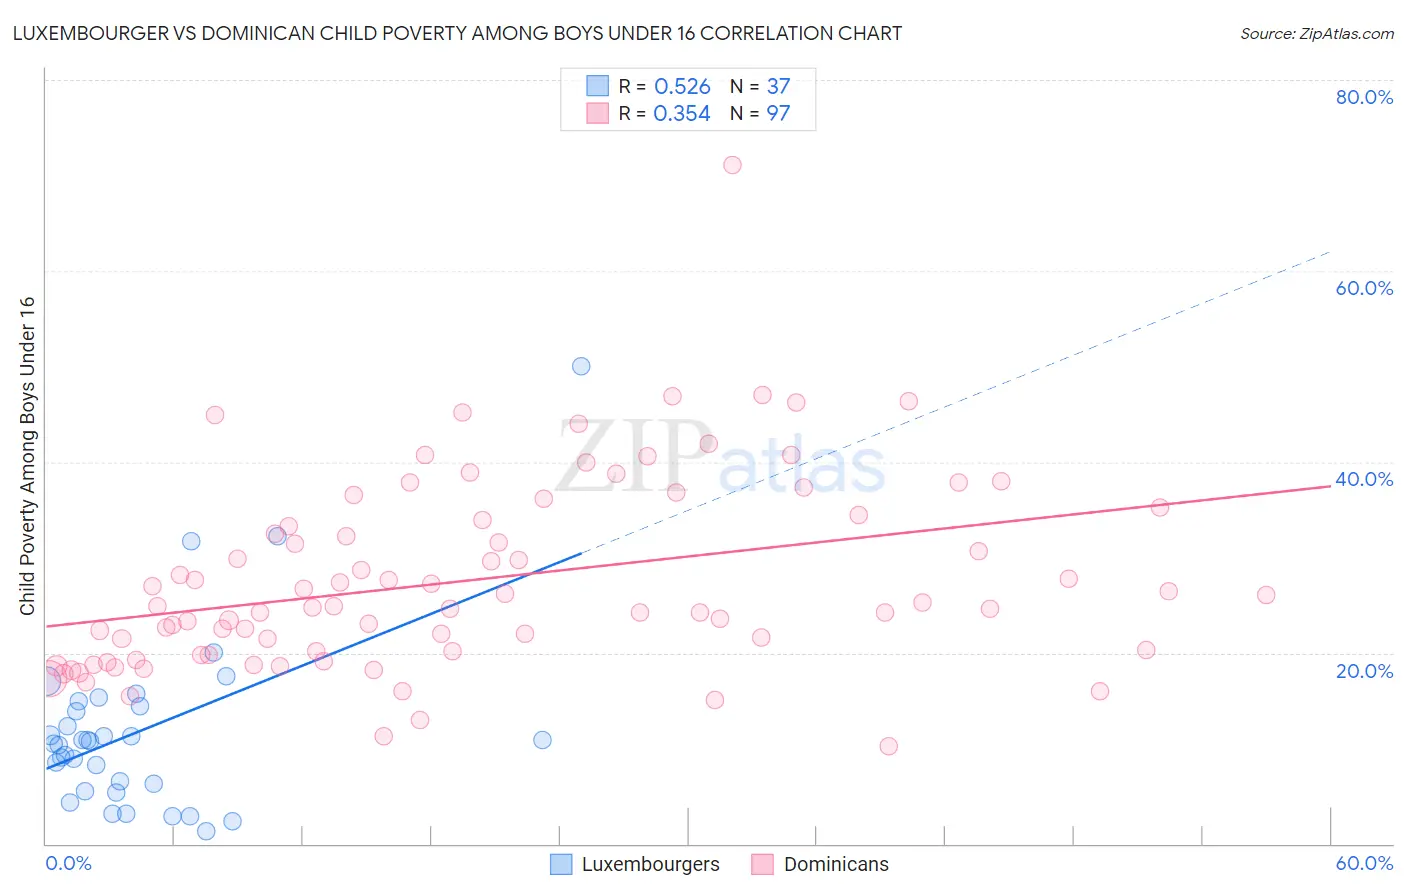 Luxembourger vs Dominican Child Poverty Among Boys Under 16